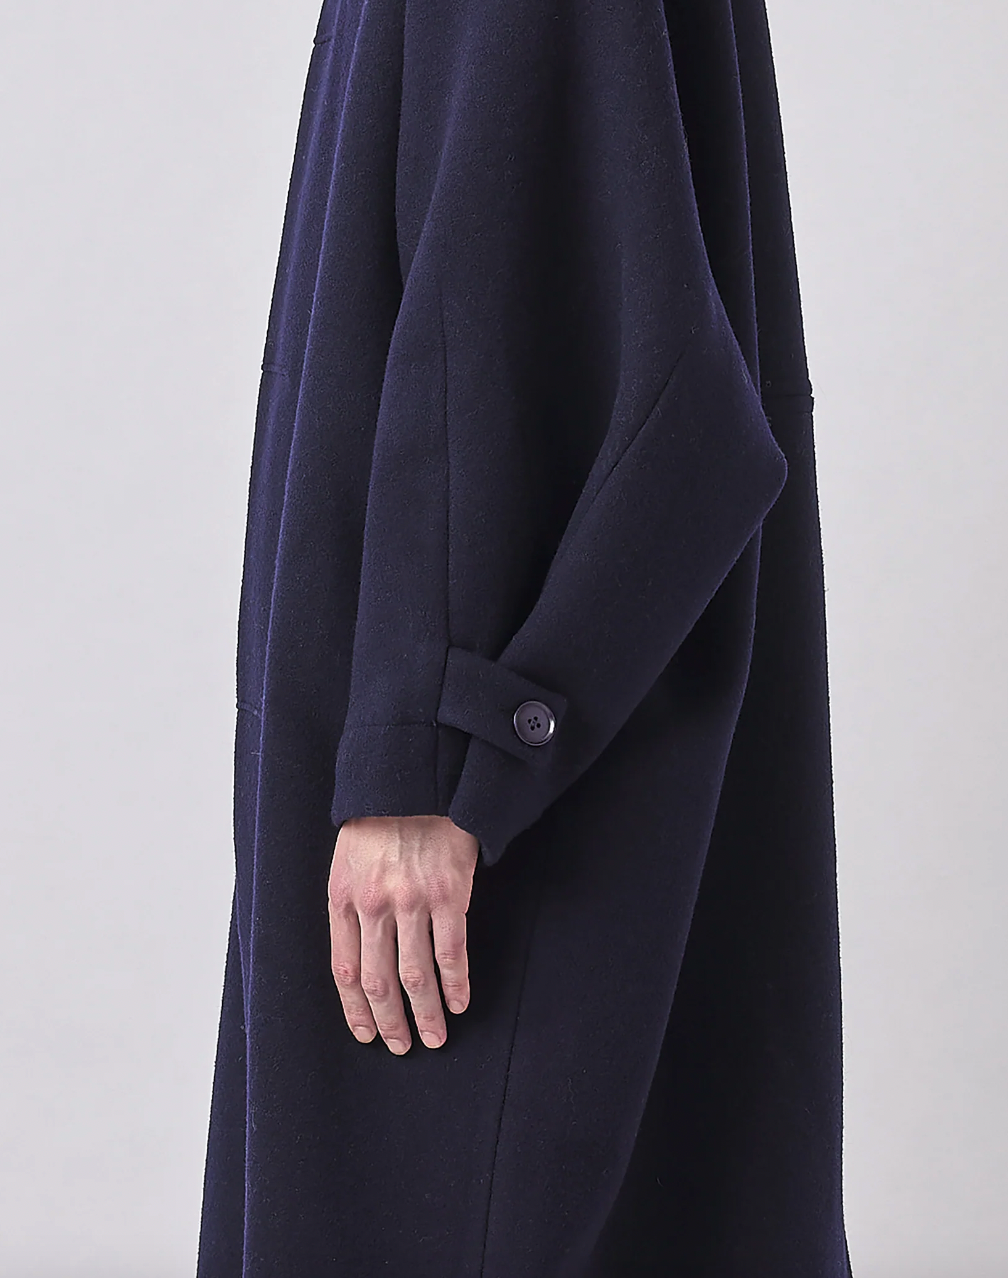 Product Image for Cuffed Wool Coat, Navy